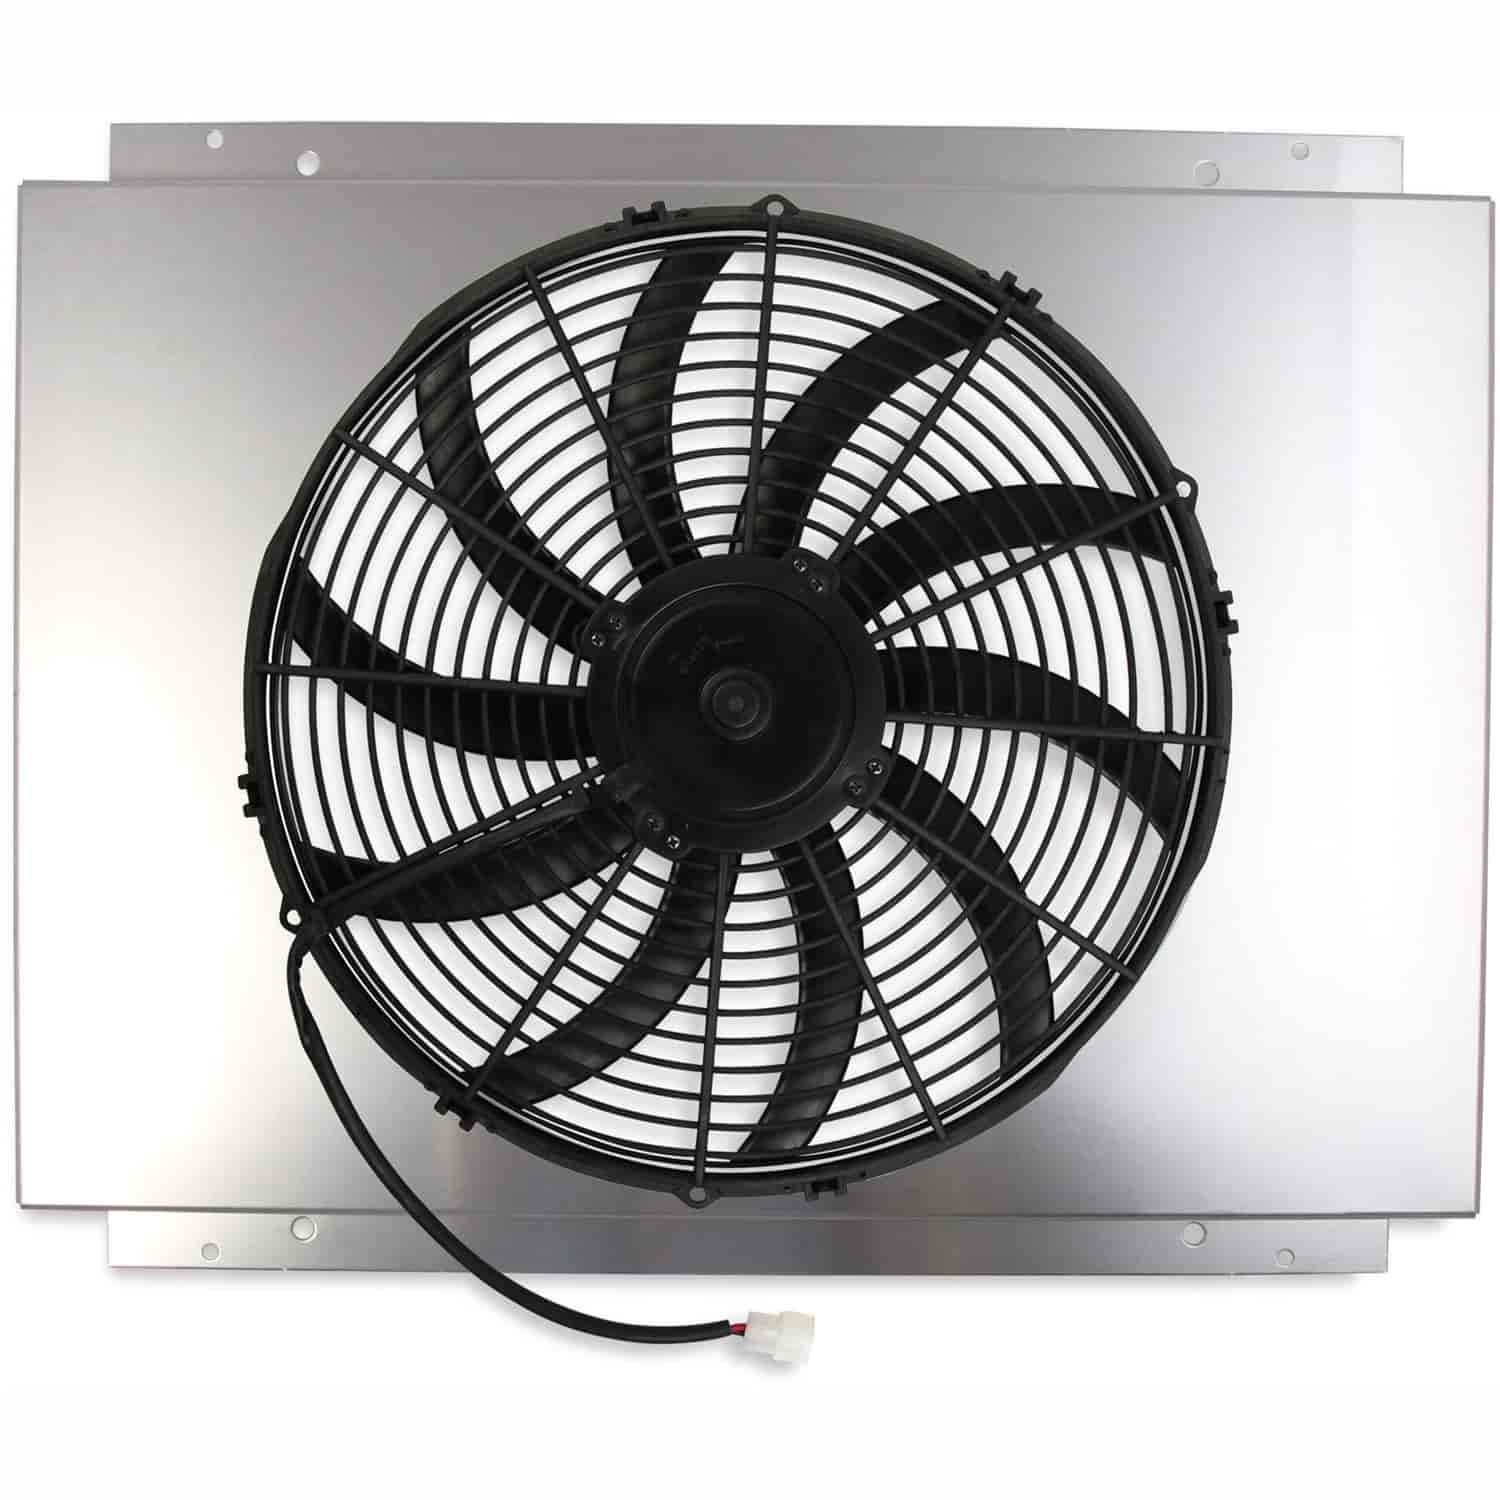 Economy Series Aluminum Fan and Shroud Package